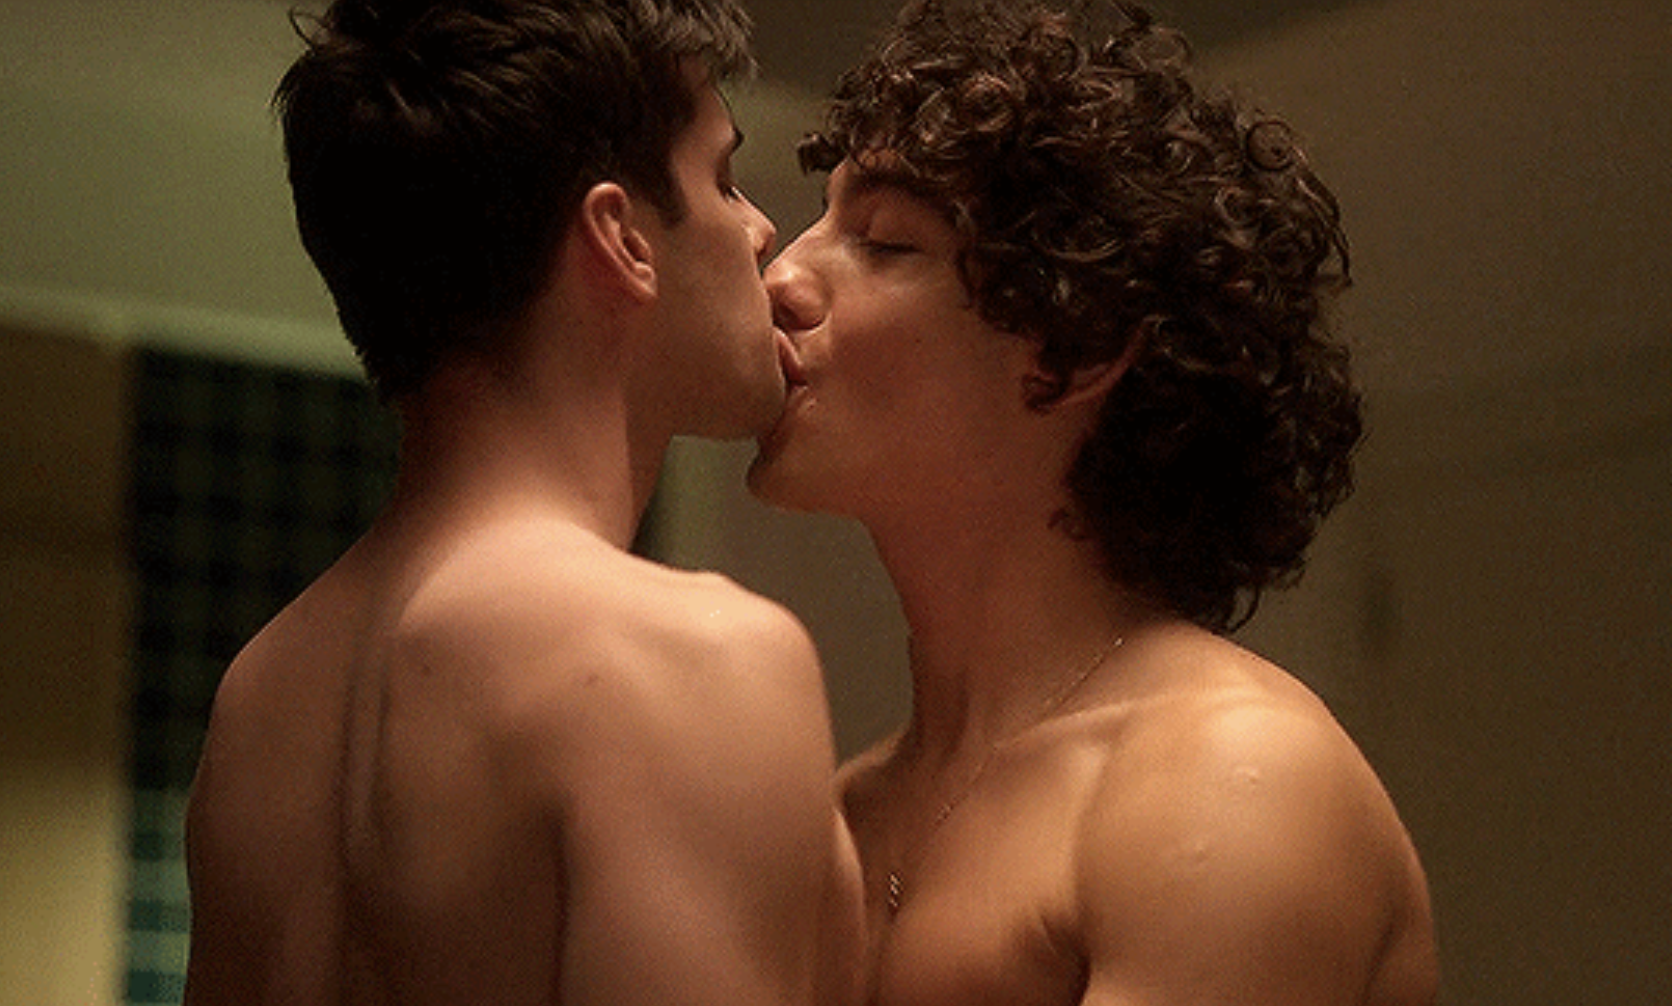 Real gay sex scenes from mainstream movies and tv shows